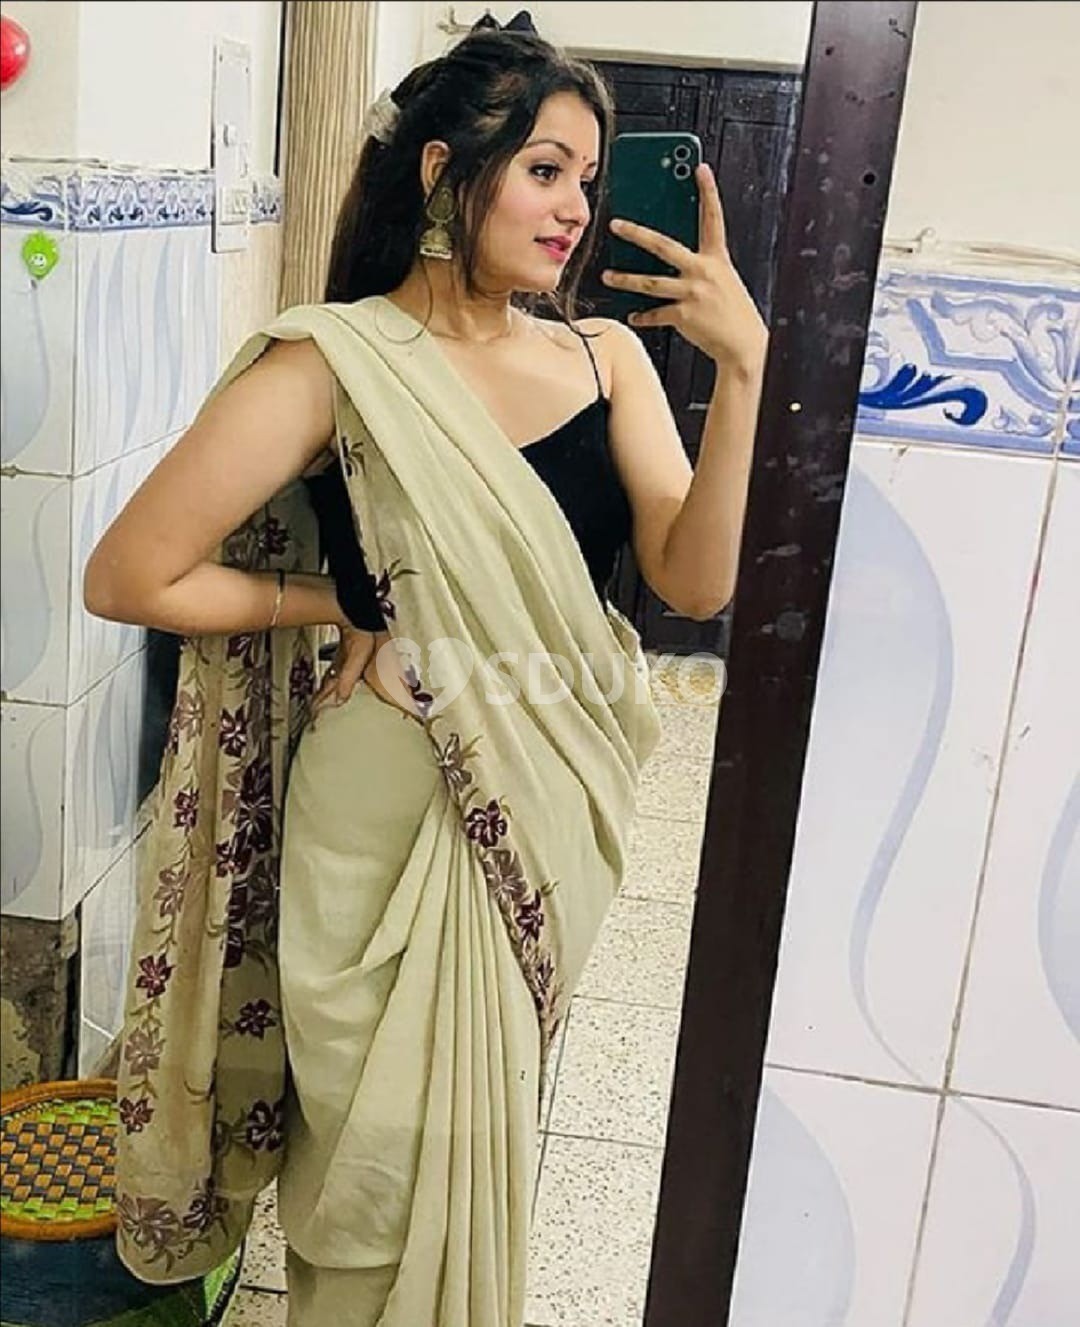 BEST PROFILE AVAILABLE IN AMEERPET 100% SAFE AND SECURE TODAY LOW PRICE UNLIMITED ENJOY HOT COLLEGE GIRL HOUSEWIFE AUNTI